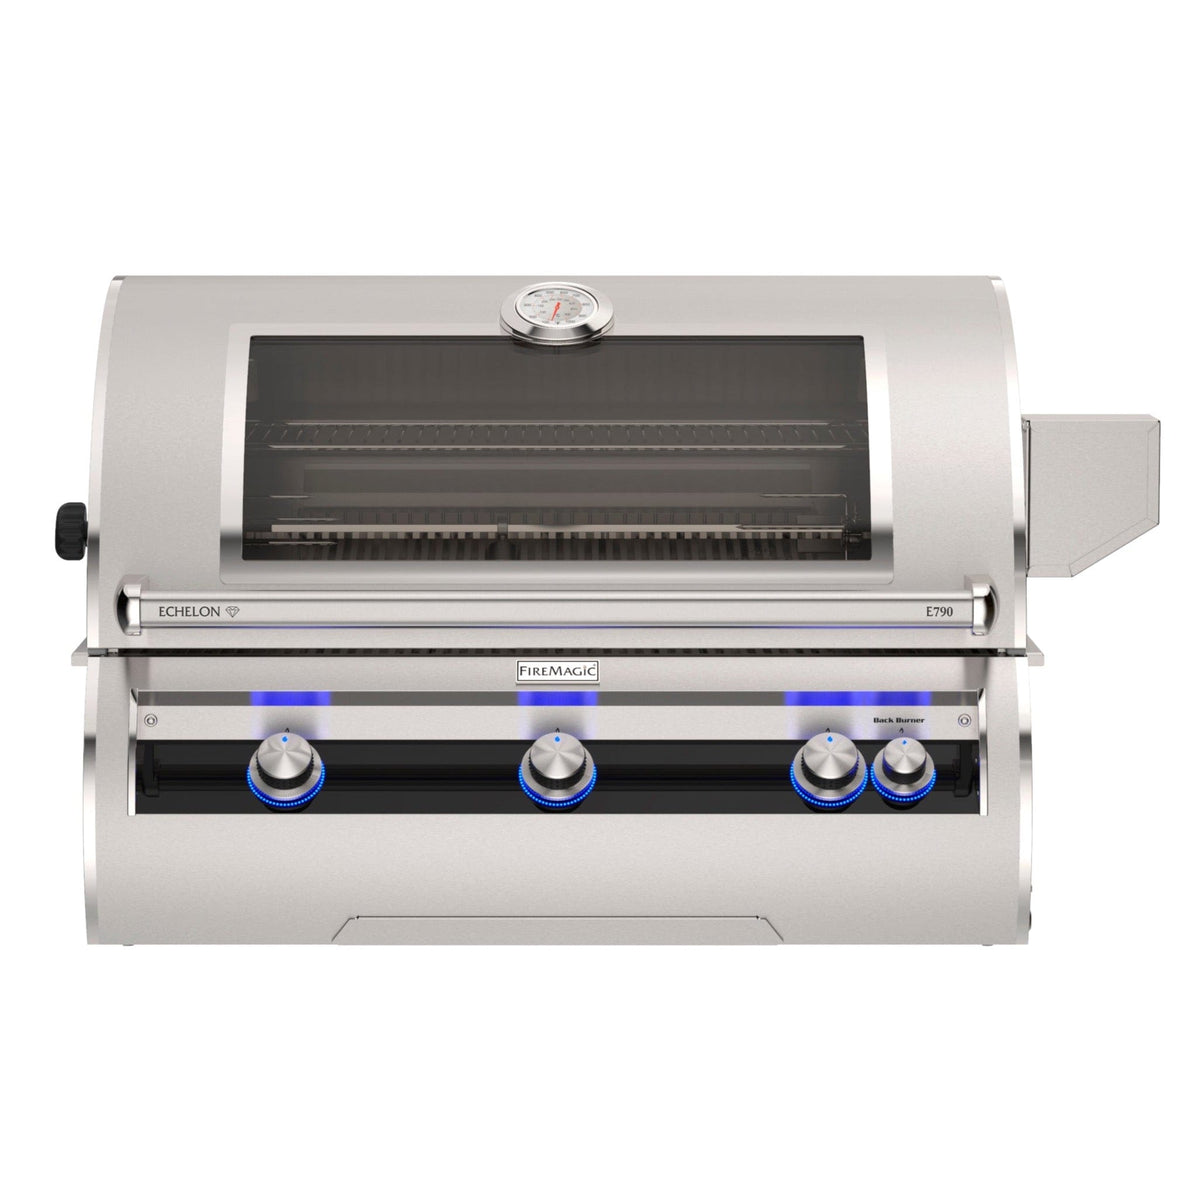 Firemagic Grills Natural Gas / All Conventional / With Magic View Window Fire Magic Echelon Diamond E790i Built-In Grill with Rotisserie and Analog Thermometer / E790i-9EAN(P), E790i-9LAN(P), E790i-9EAN(P)-W, E790i-9LAN(P)-W